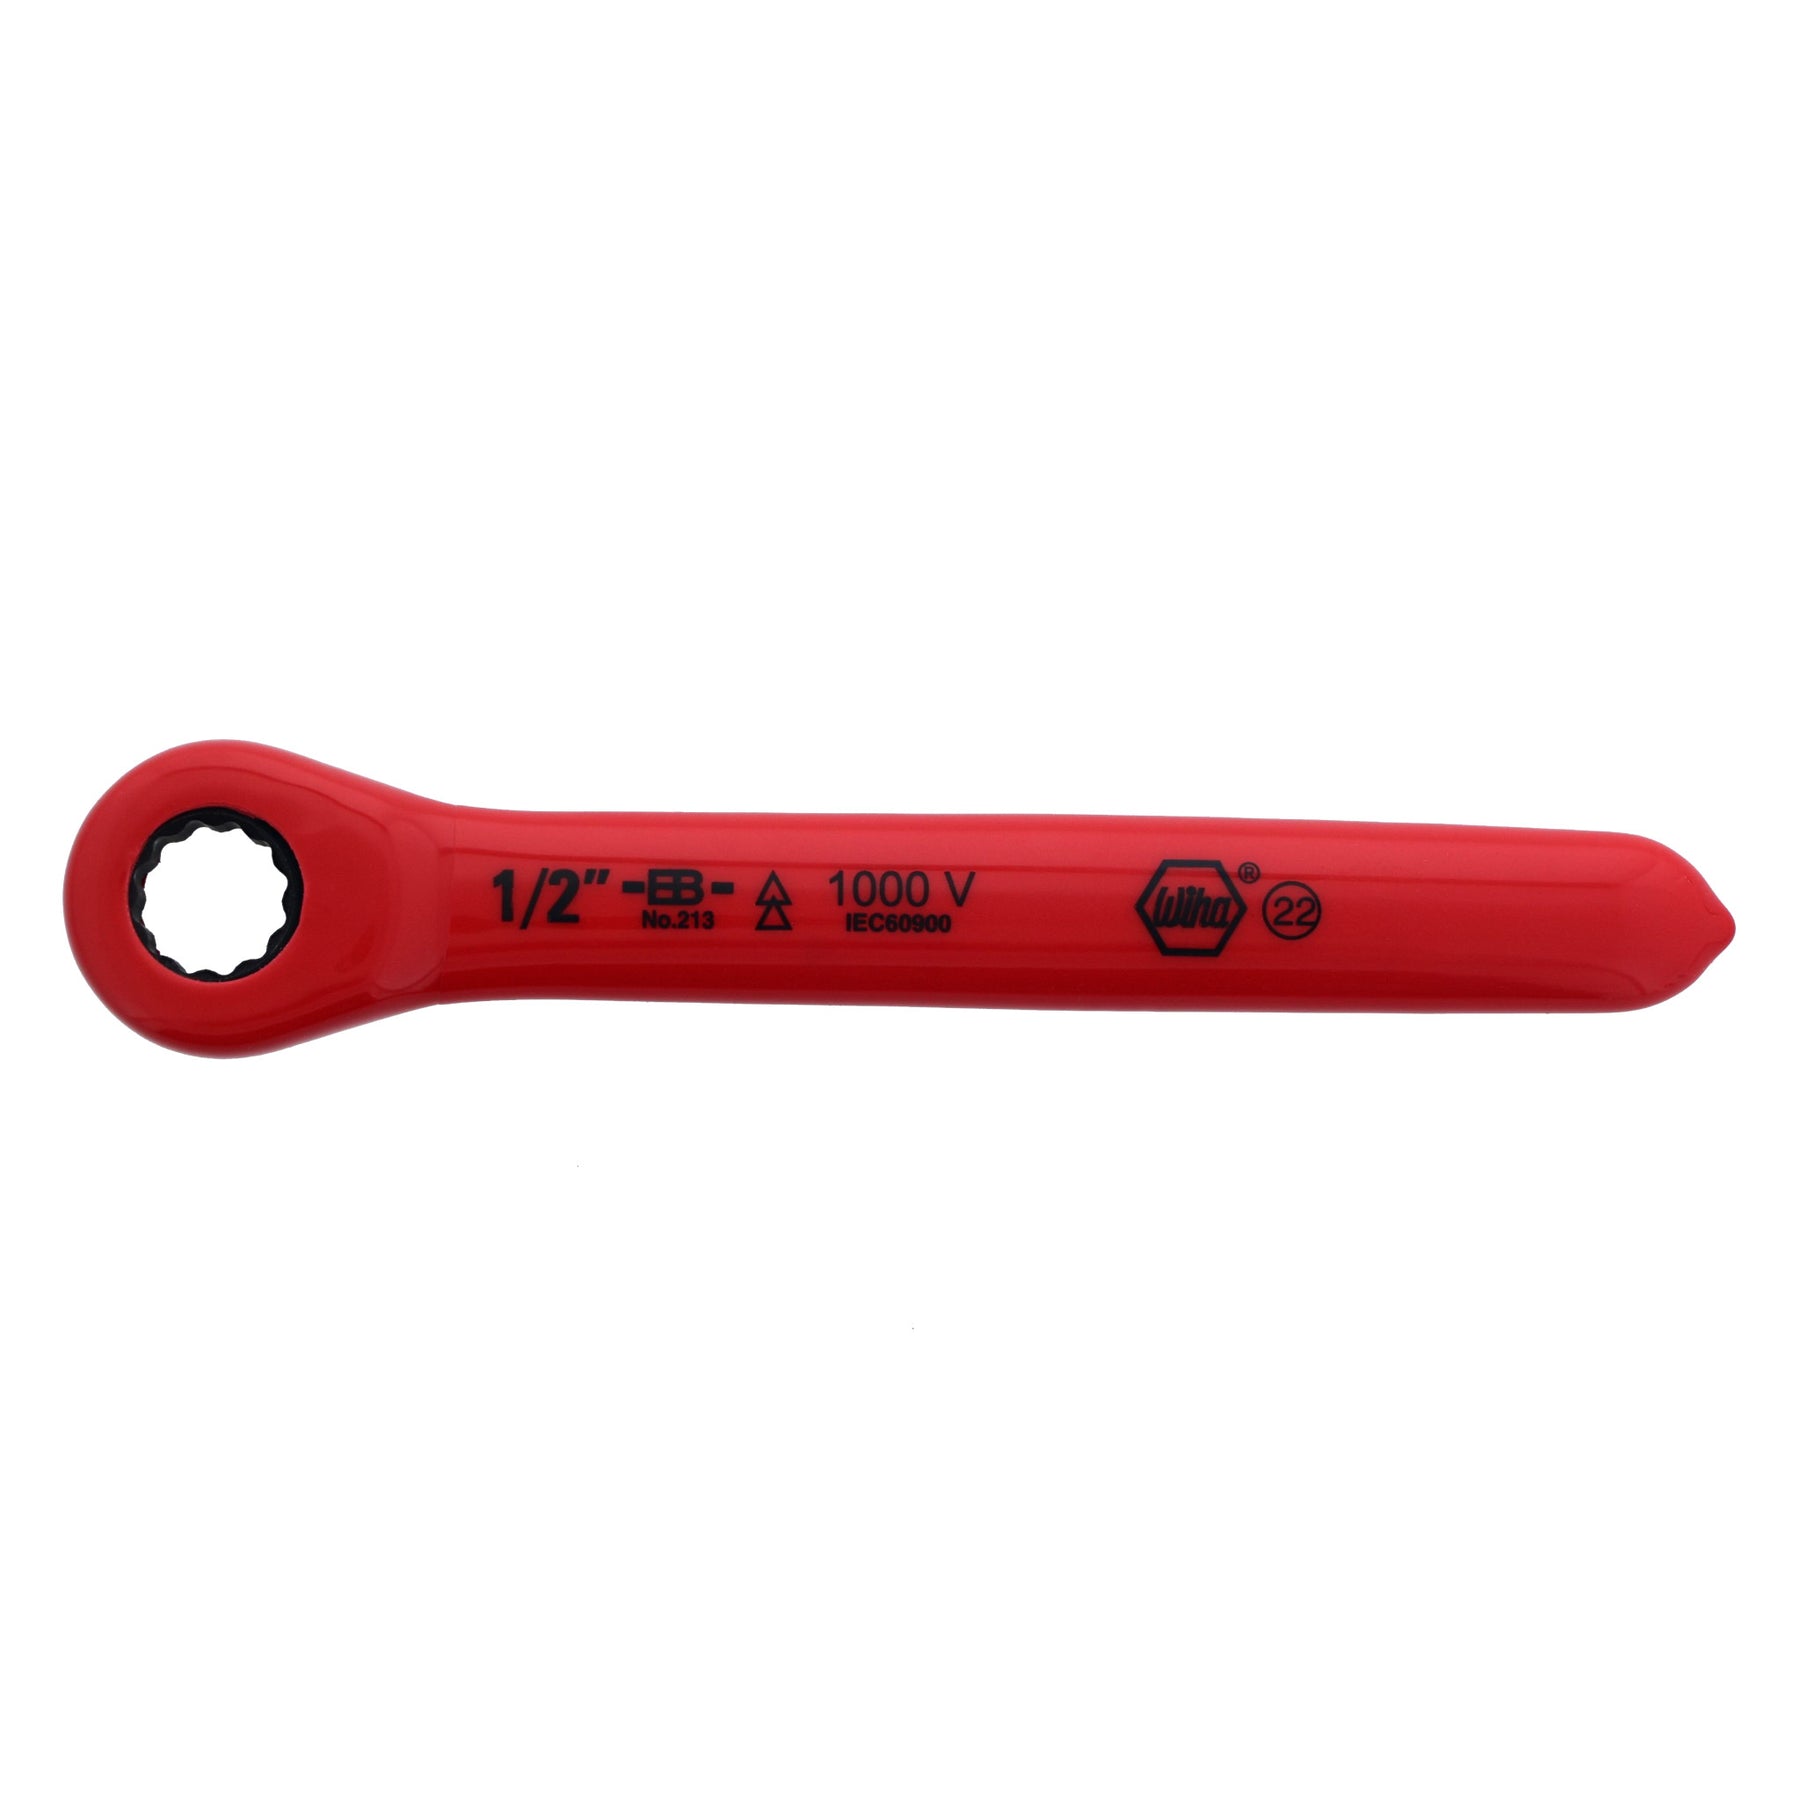 Insulated Ratchet Wrench 6 Piece Set - SAE